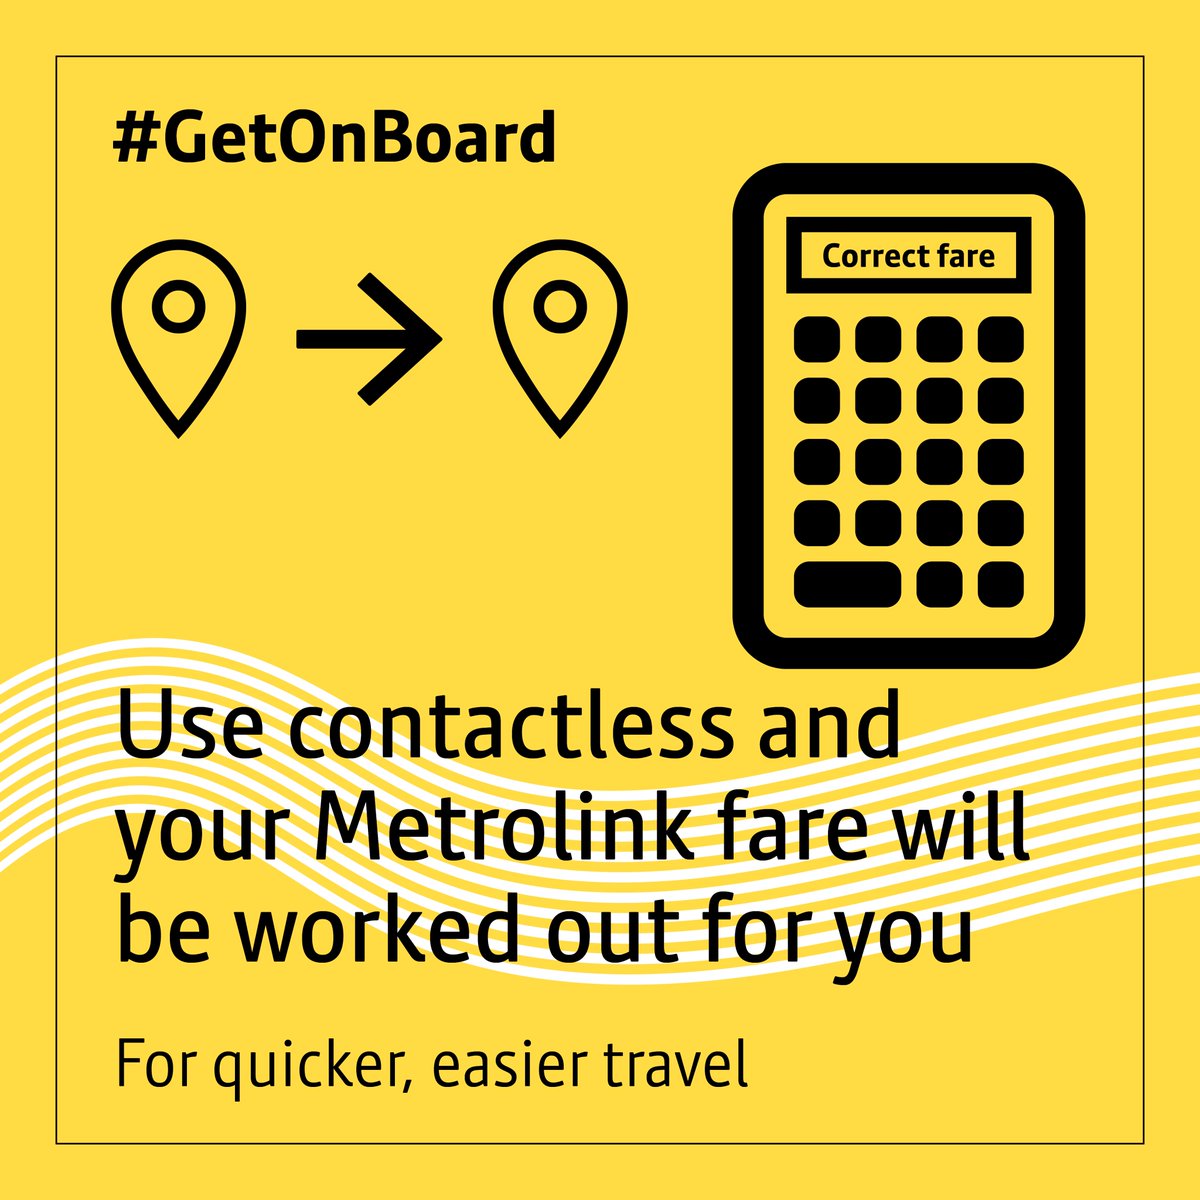 For quicker, easier travel without the jams, touch-in at the start and touch-out at the end of your journey using contactless on Metrolink. Make sure you use the same device, and we'll work out the right fare for you. #GetOnBoard